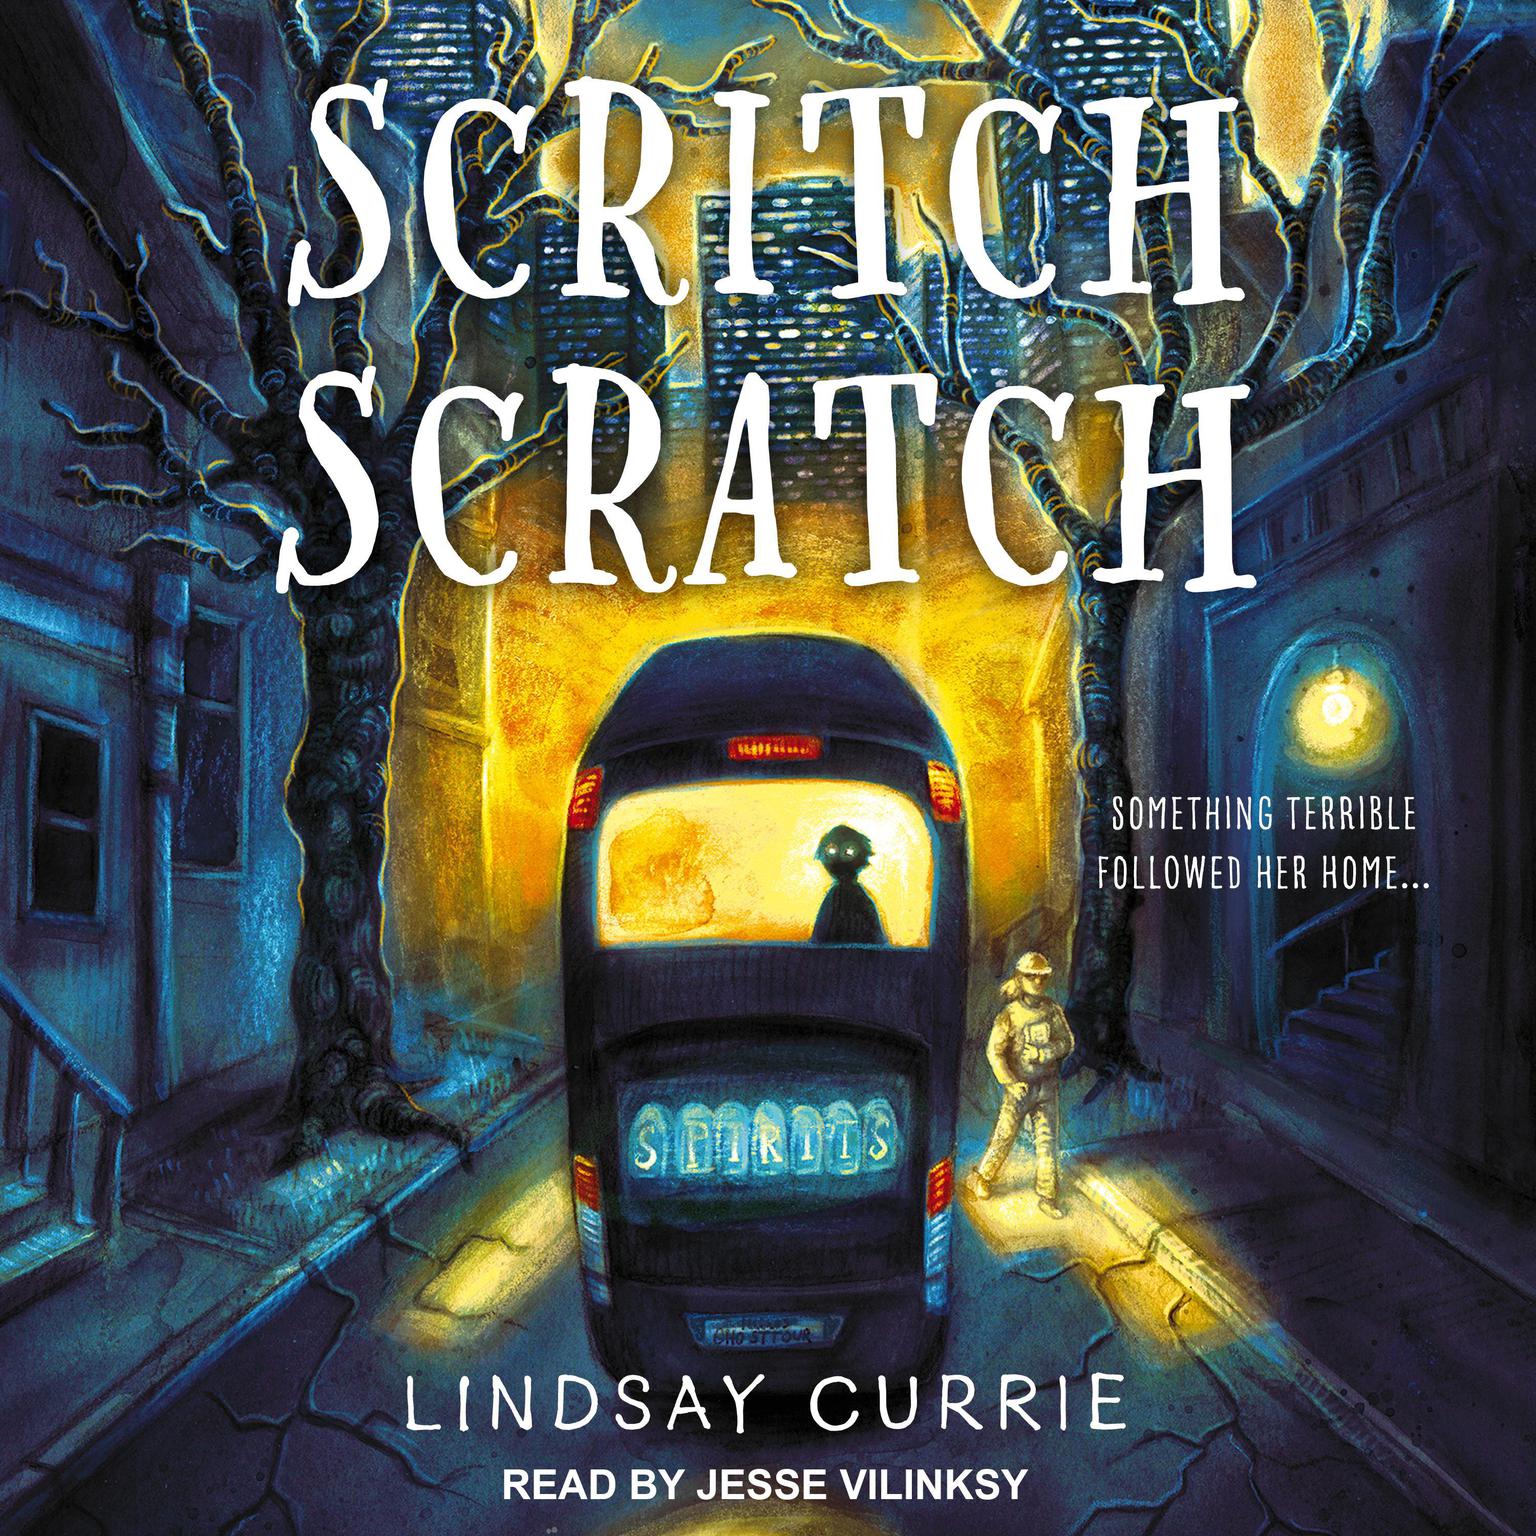 Scritch Scratch Audiobook, by Lindsay Currie